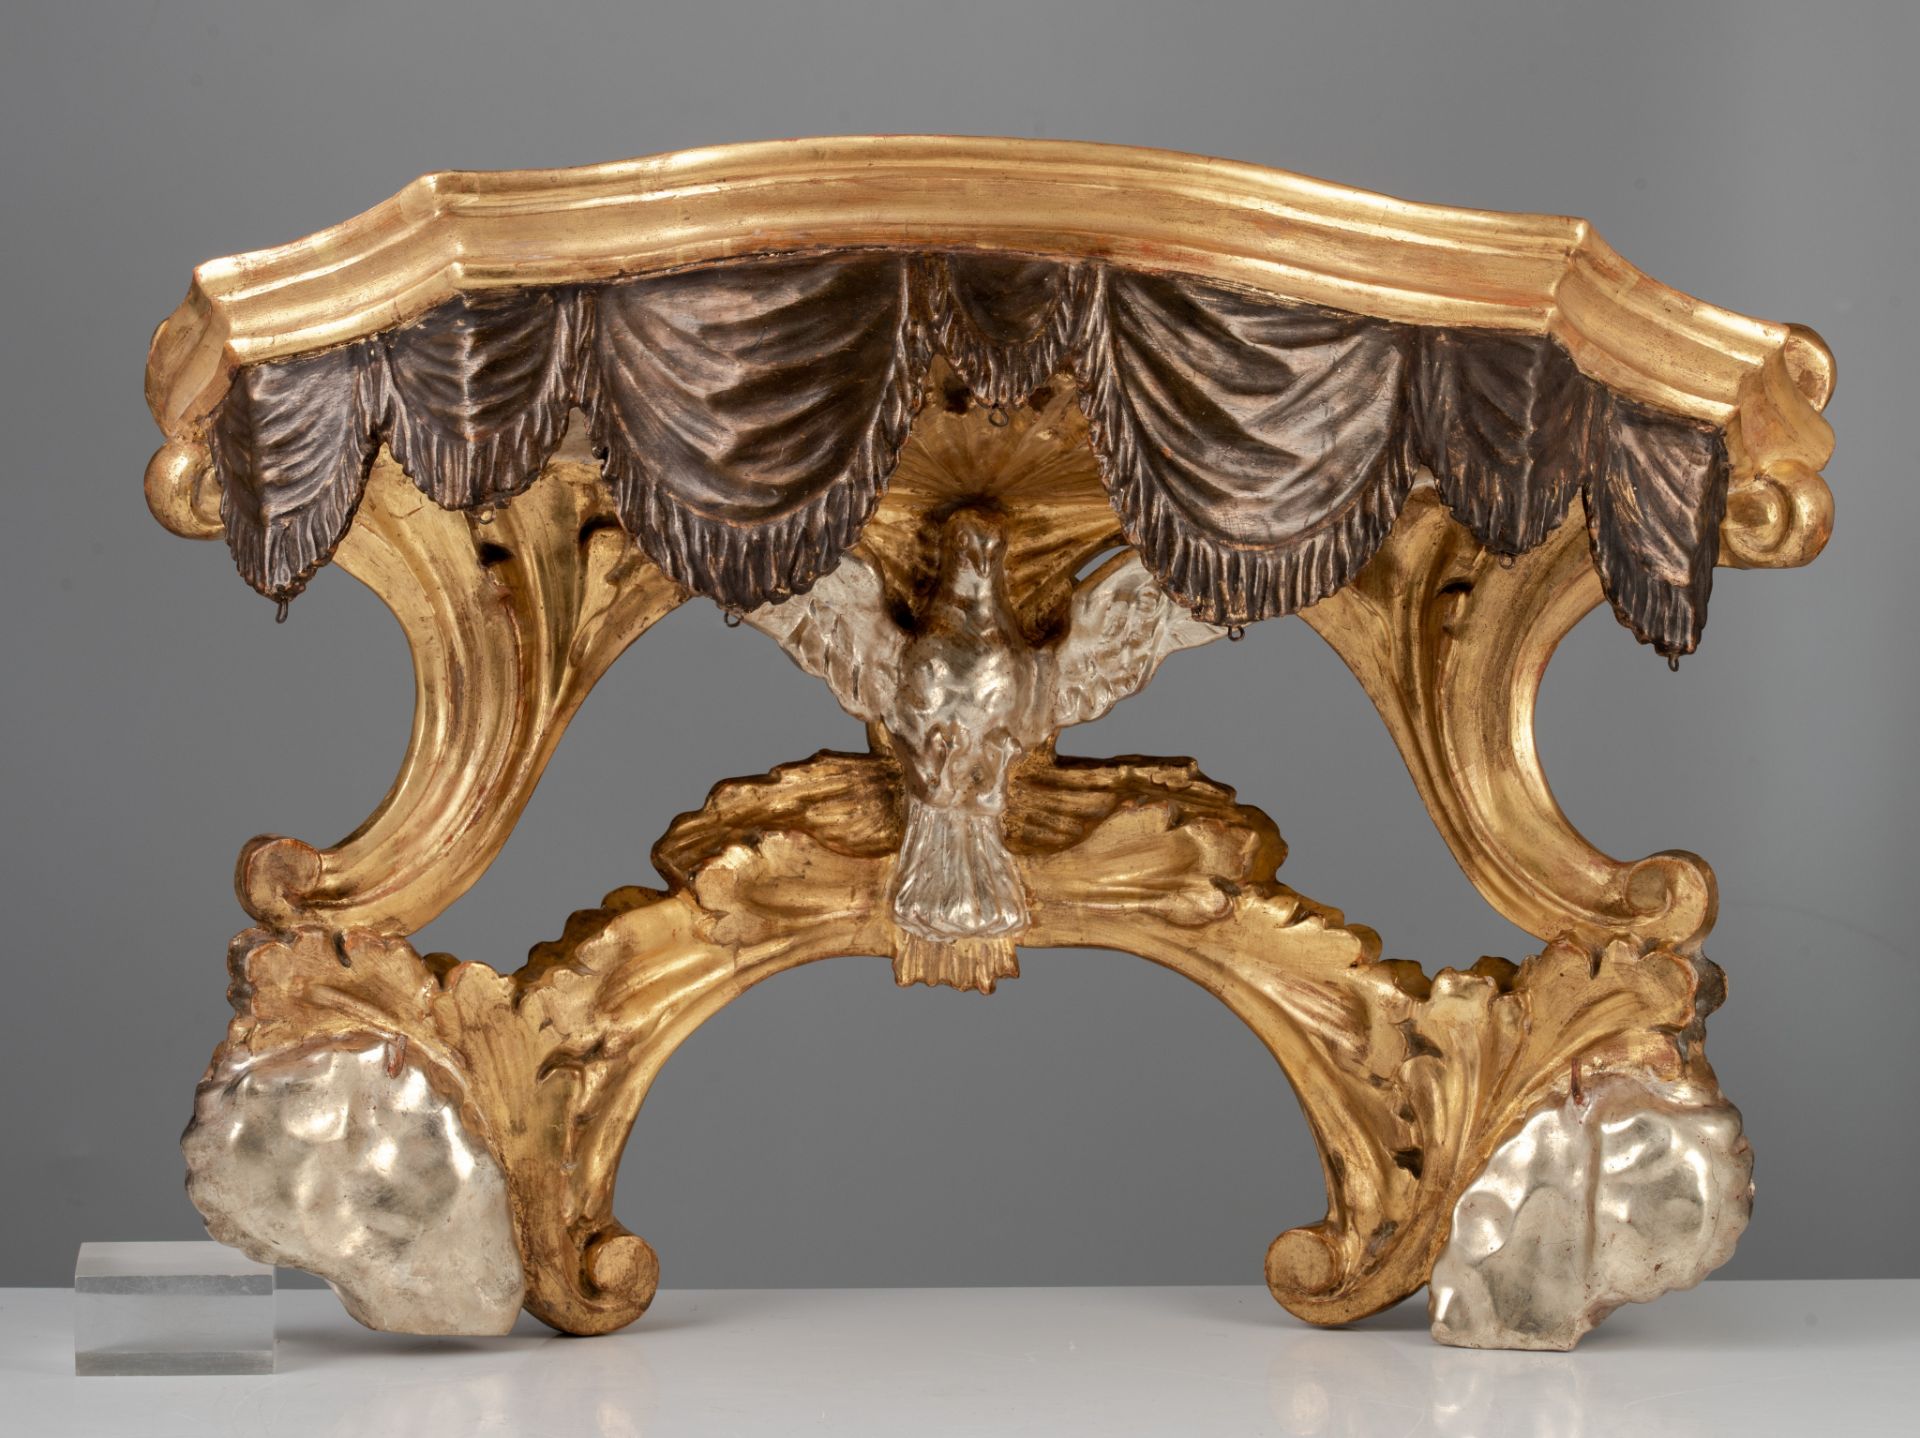 A gilt and silver wooden baldachin with the dove of the Holy Spirit, 18thC, H 50 - W 63 cm - Image 2 of 14